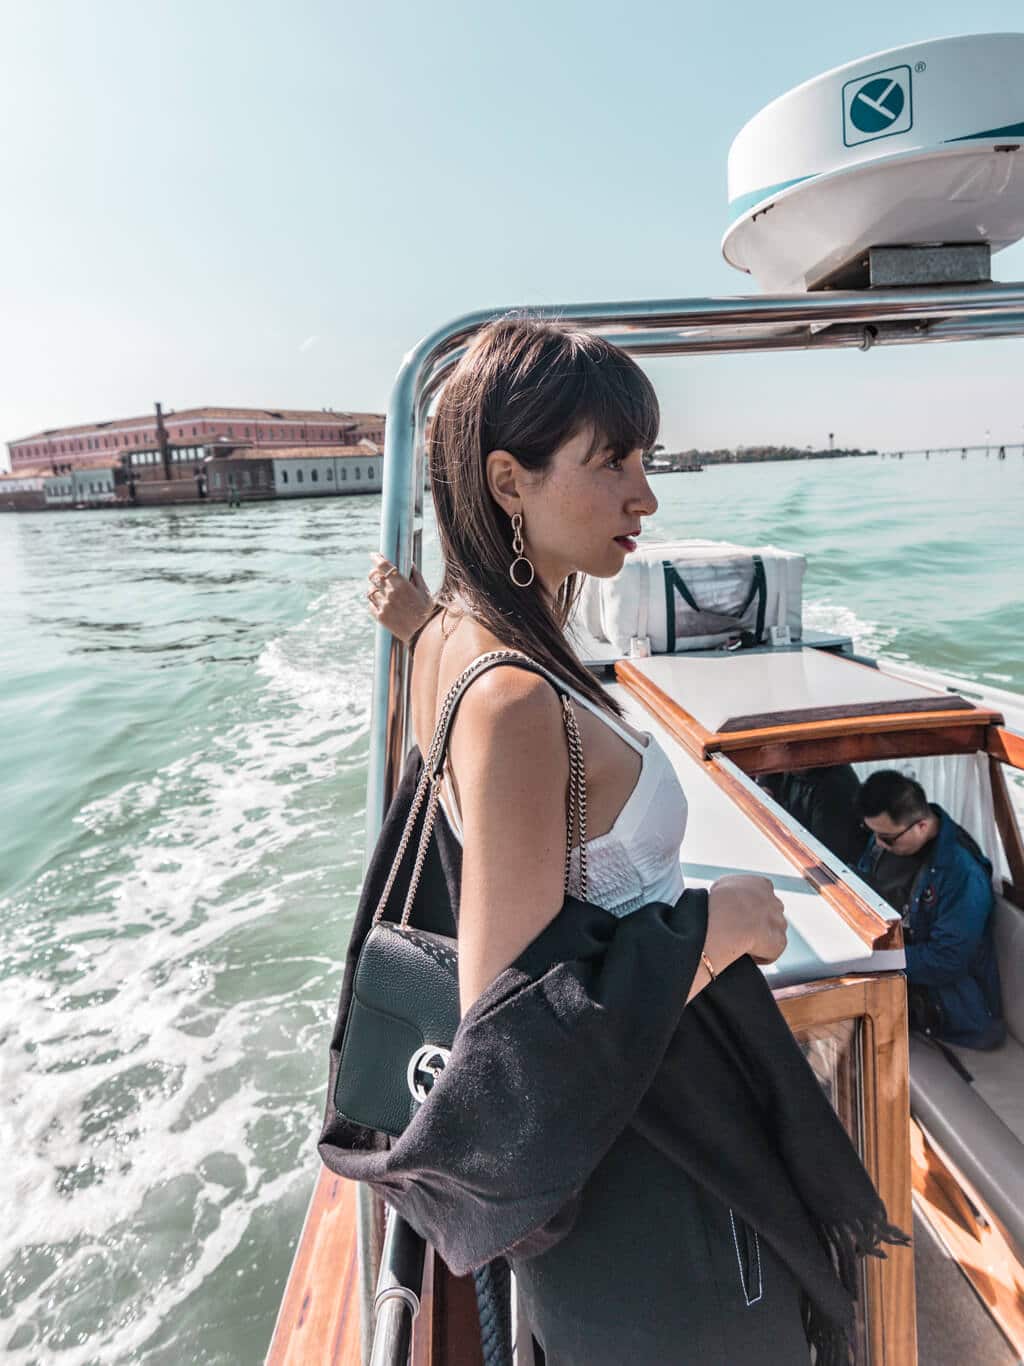 Venice Travel Guide - things to do in Venice, including food recommendations and tips